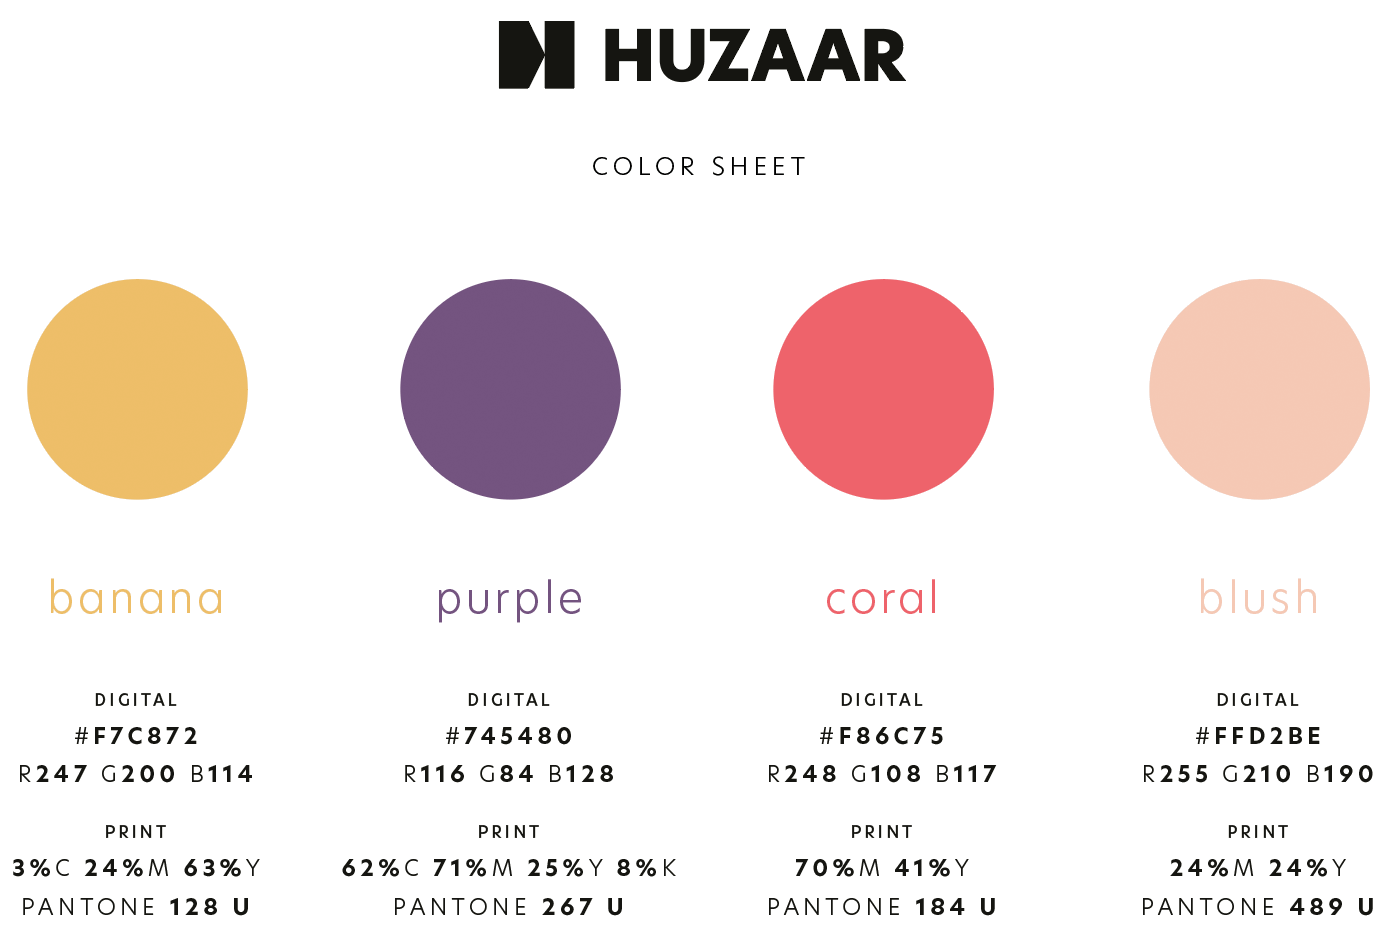 Huzaar color palette, showing banana, purple, coral and blush with color values